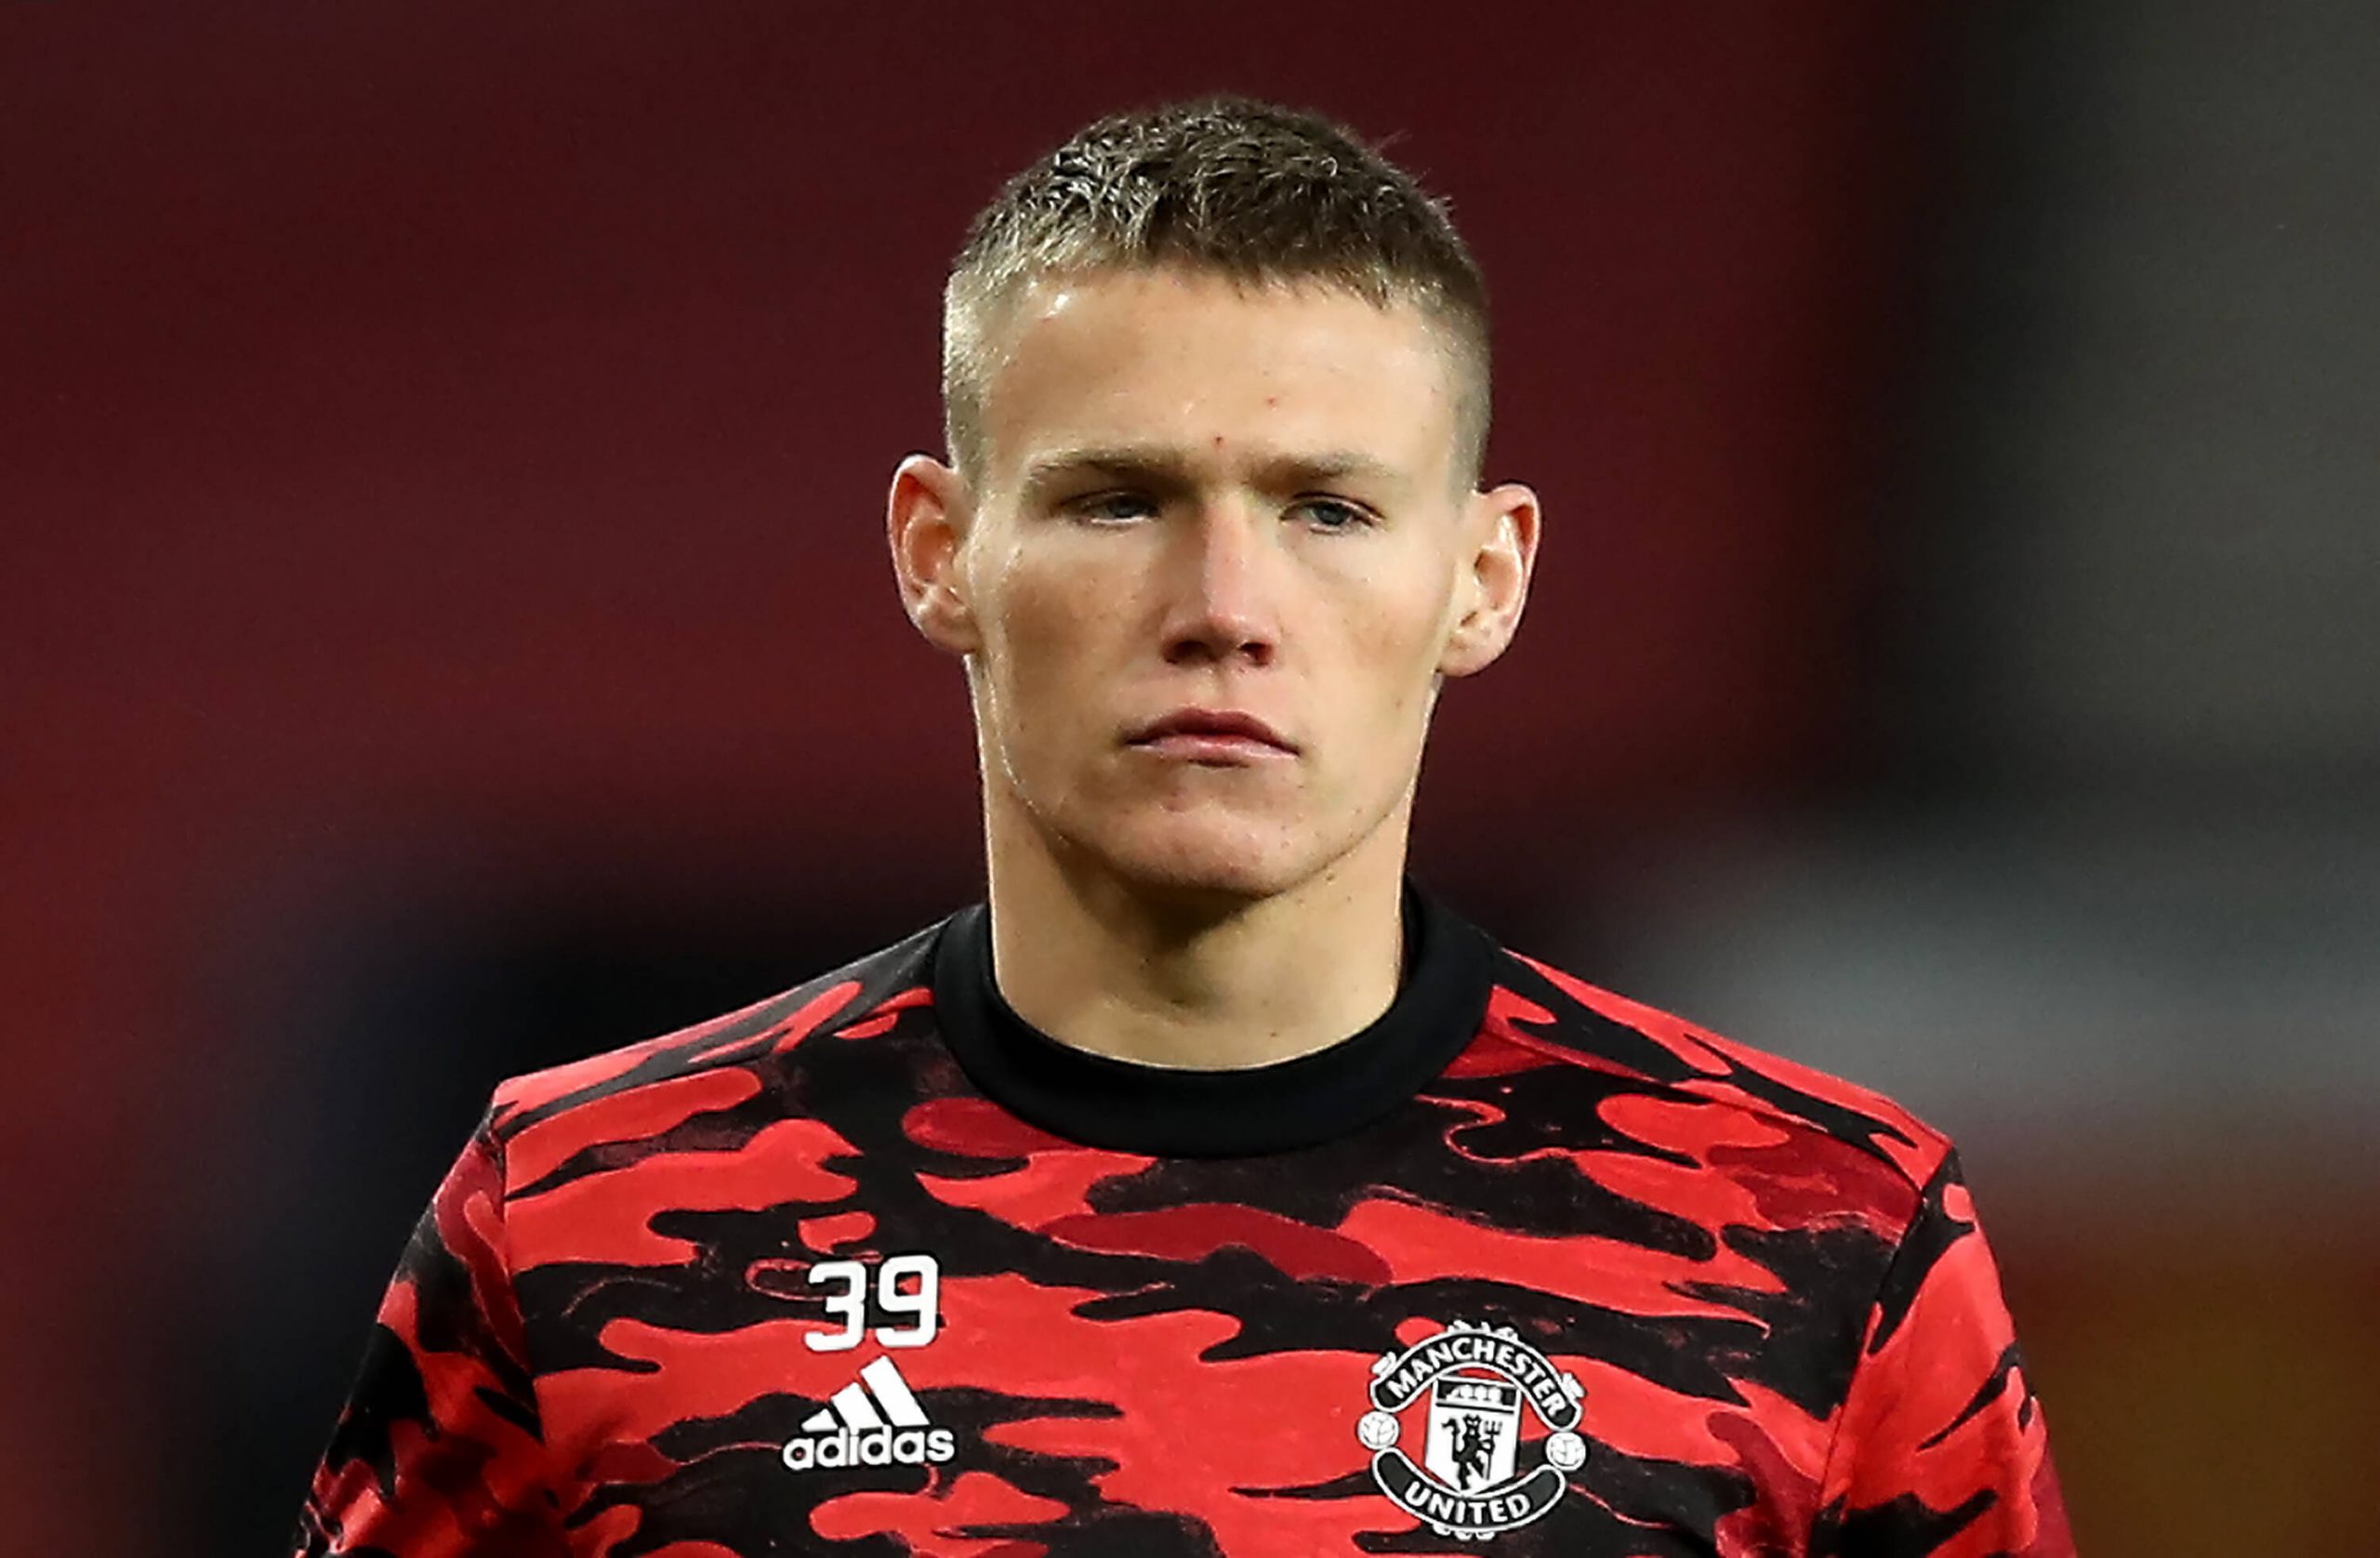 Injury Update: Manchester United star Scott McTominay in line to feature against West Ham.